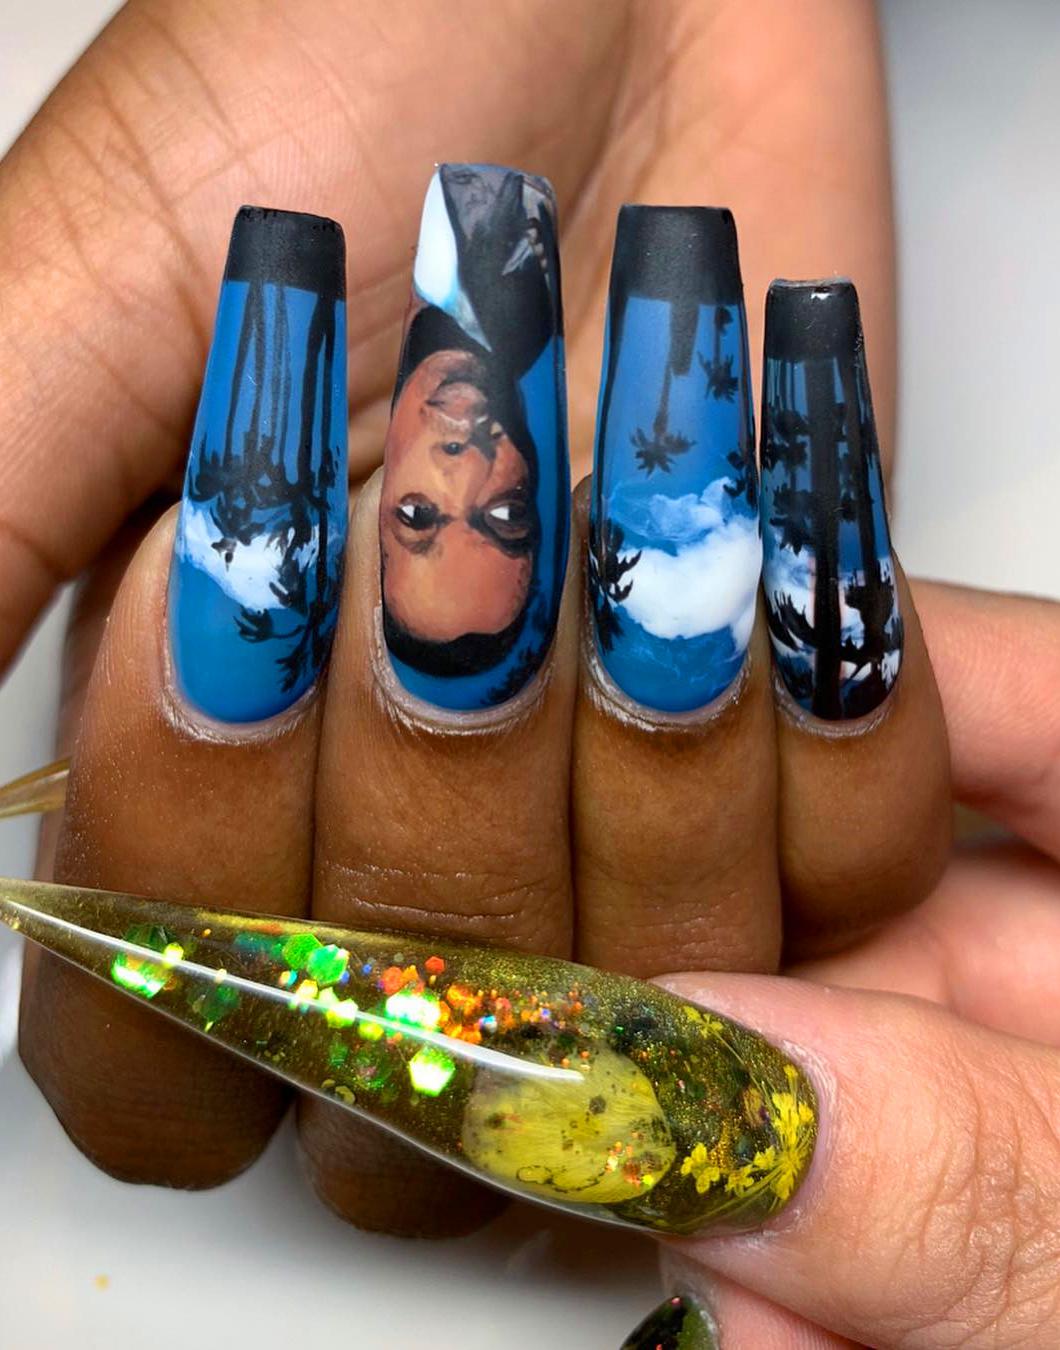 10+ Acrylic Nails To Inspire Yourself